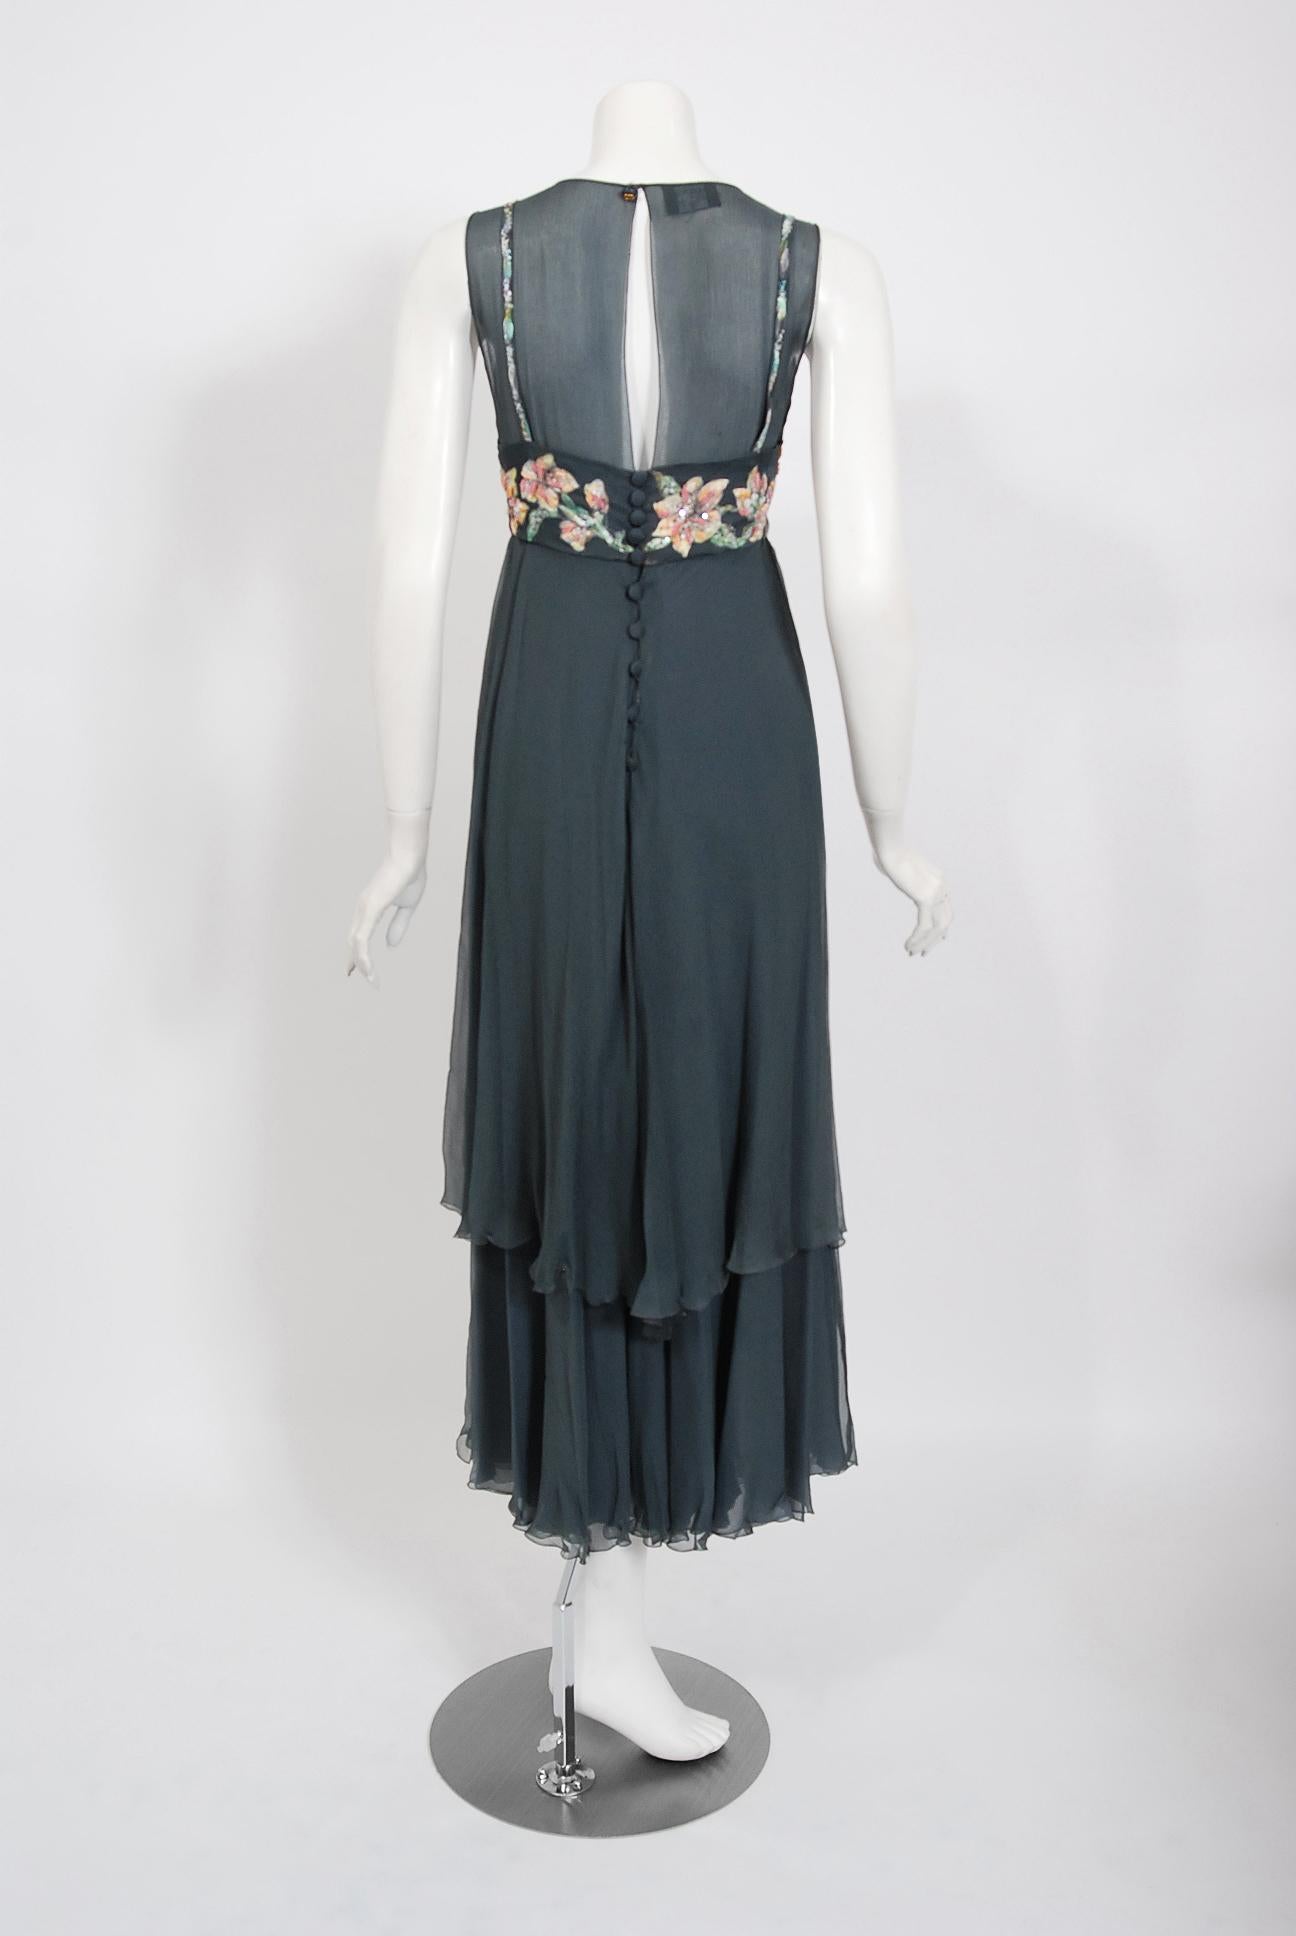 Vintage 1993 Chanel Documented Hand-Painted Sequin Floral Charcoal Chiffon Dress 3